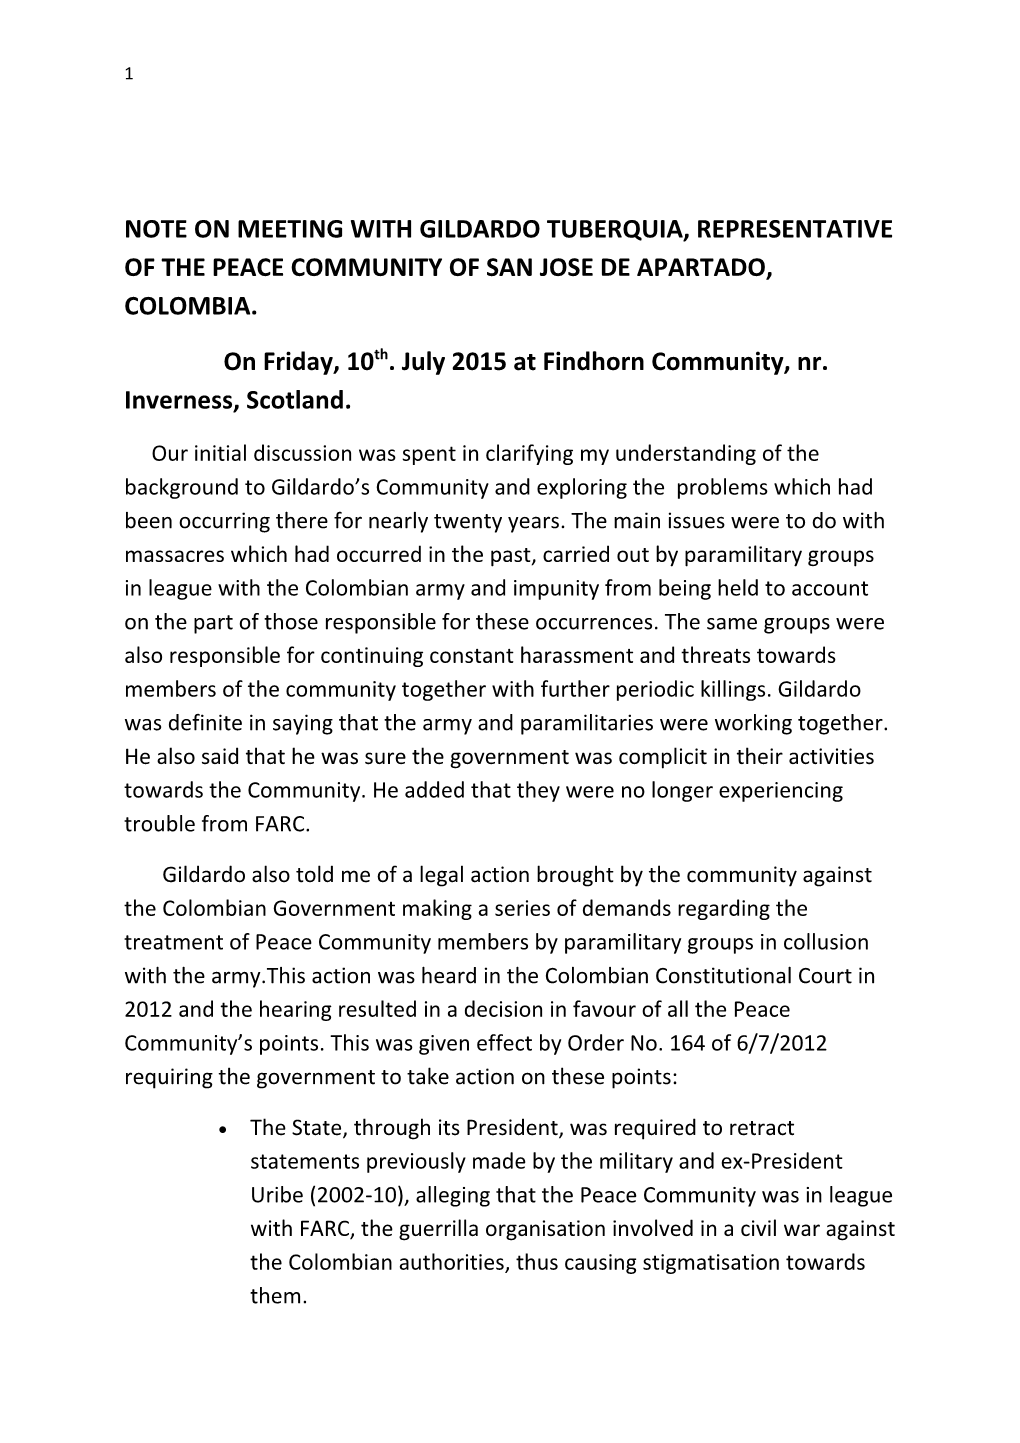 Note on Meeting with Gildardo Tuberquia, Representative of the Peace Community of San